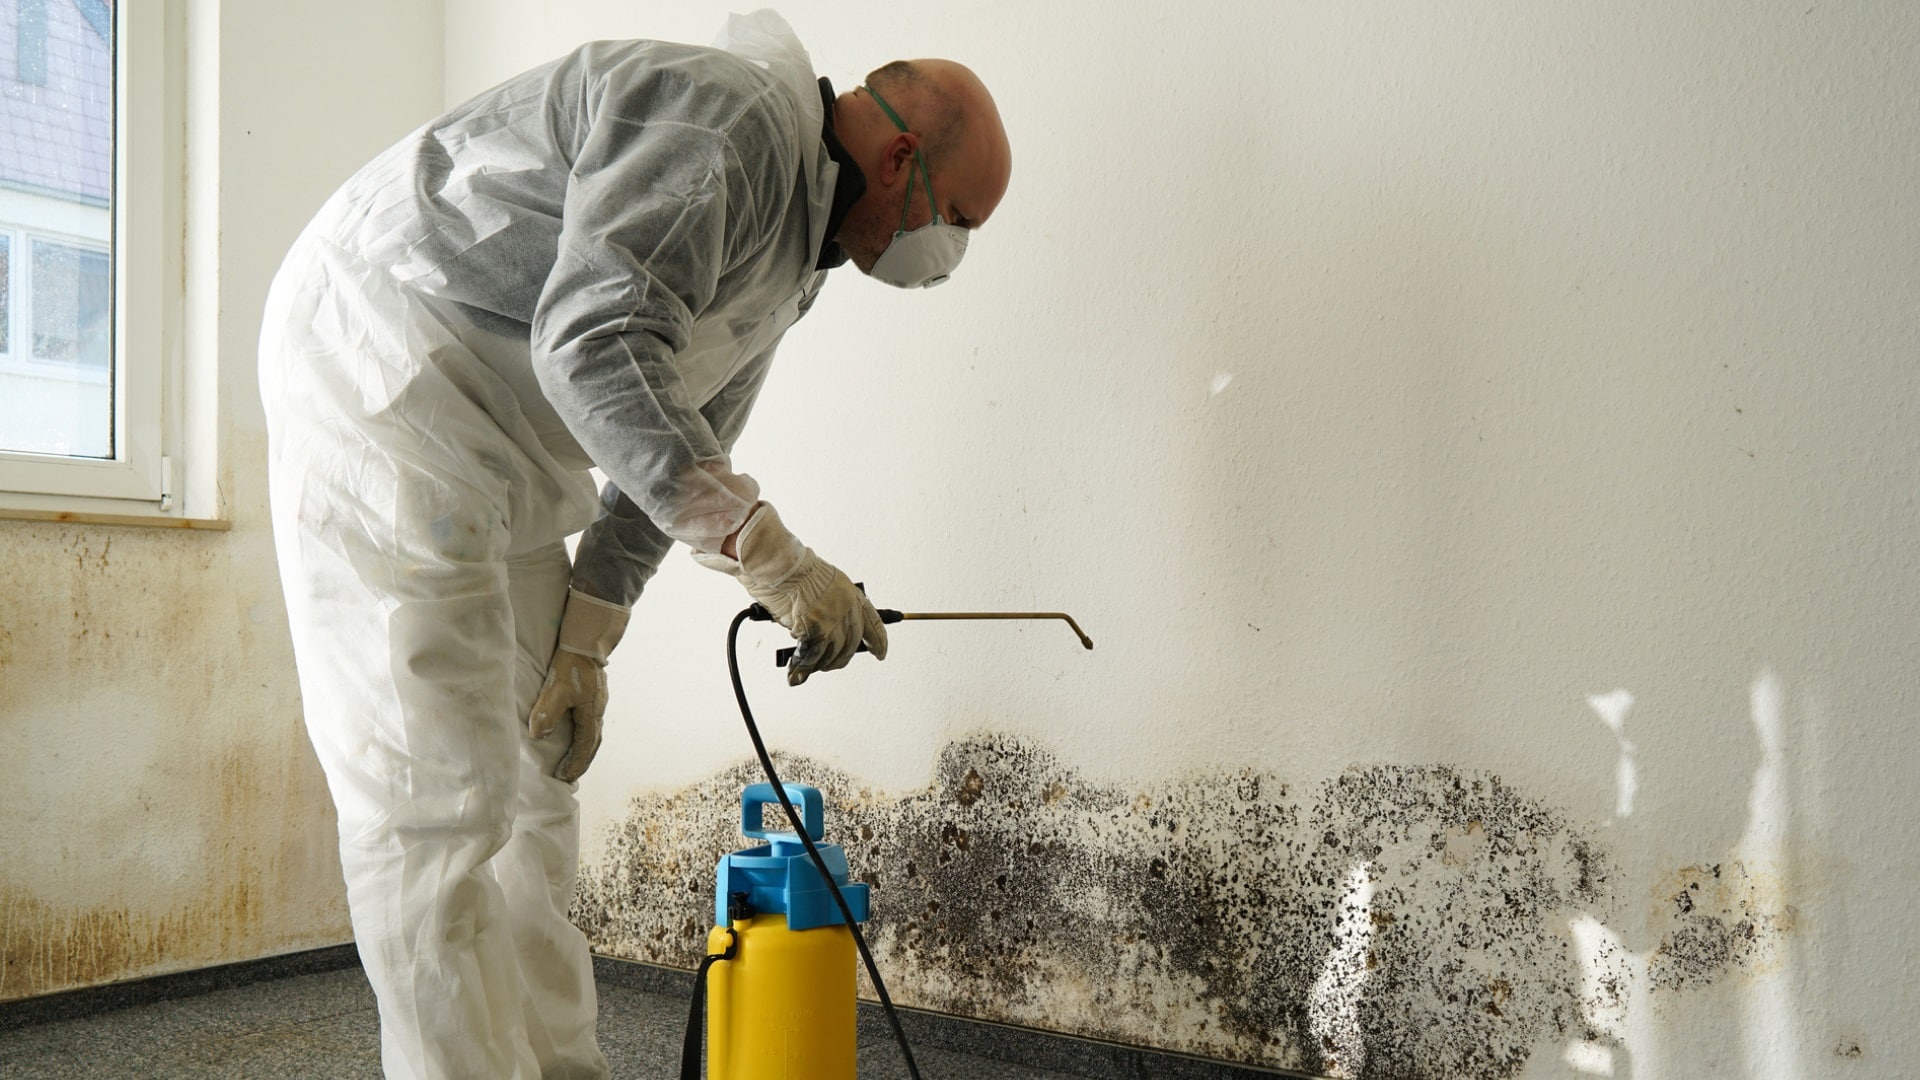 Mold Removal Minneapolis, Mold Remediation Minneapolis, Minneapolis Water Damage Specialist 247, Water Damage, Water Damage Repair, Water Damage Restoration, Water Damage Restoration, Water Removal